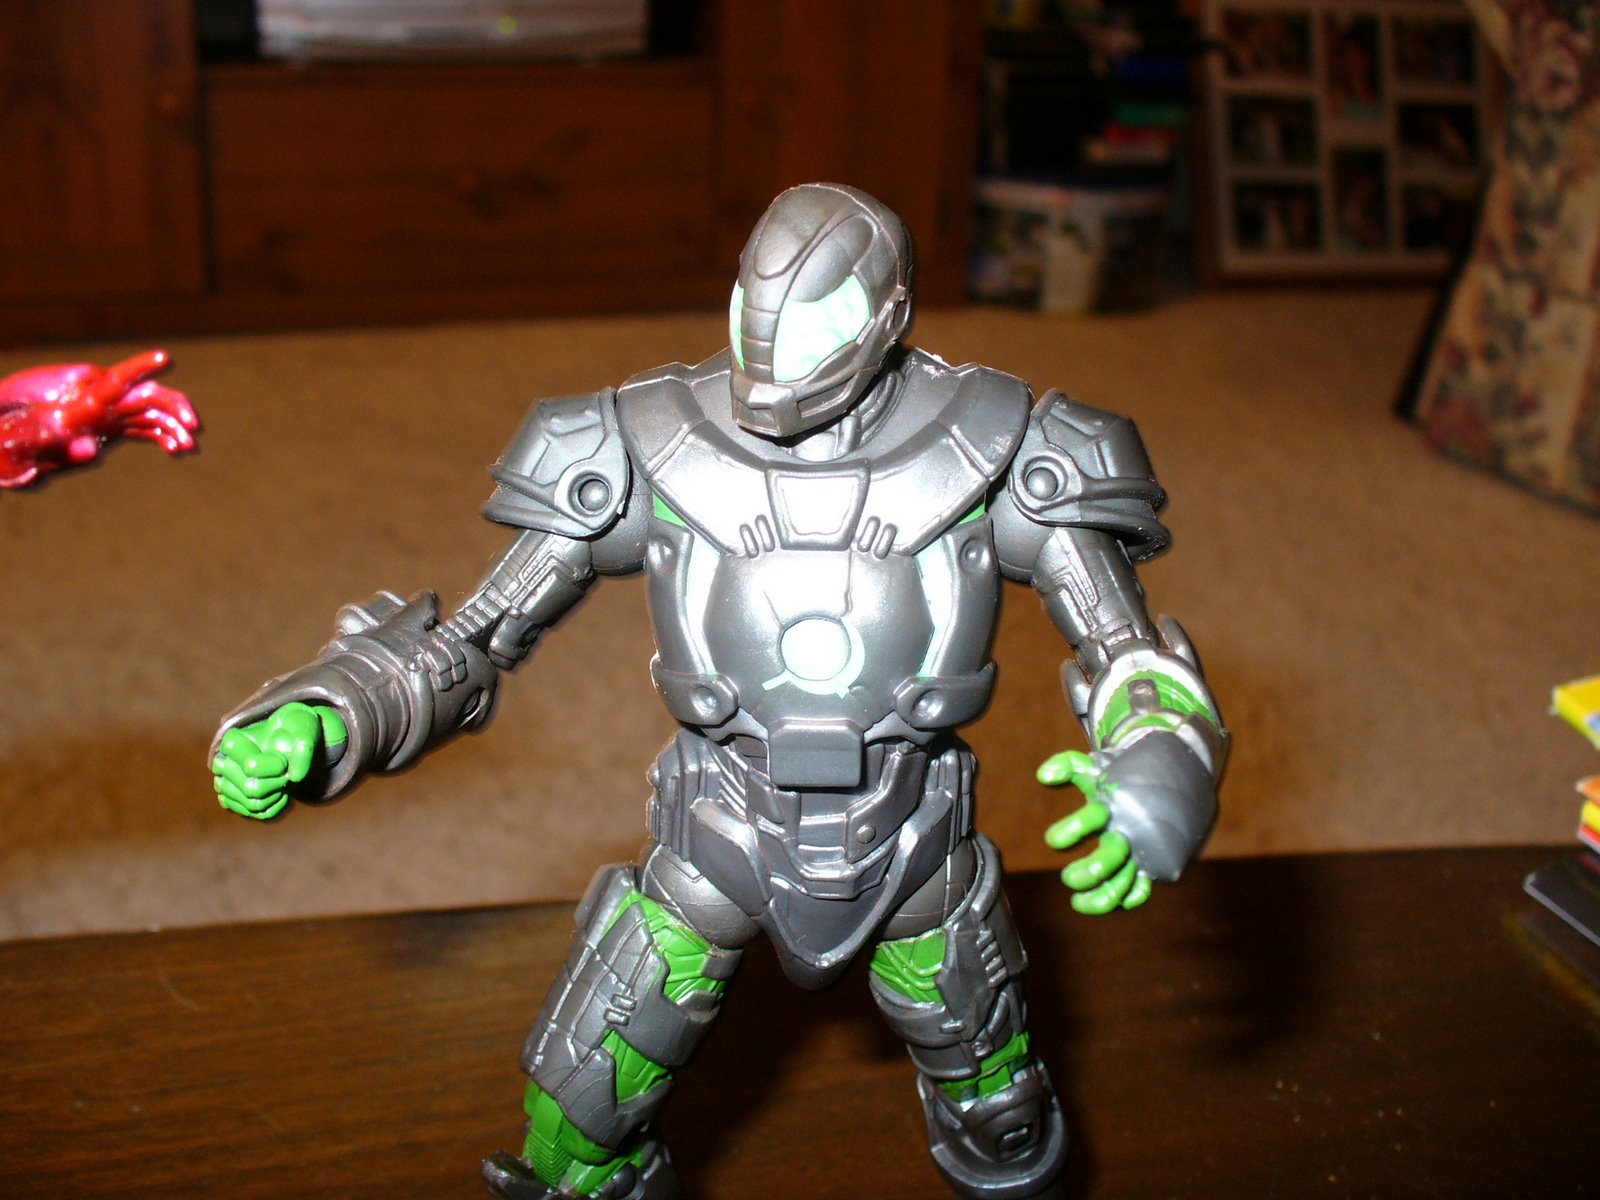 Mere words cannot match... the AWESOME POWER of TITANIUM MAN!